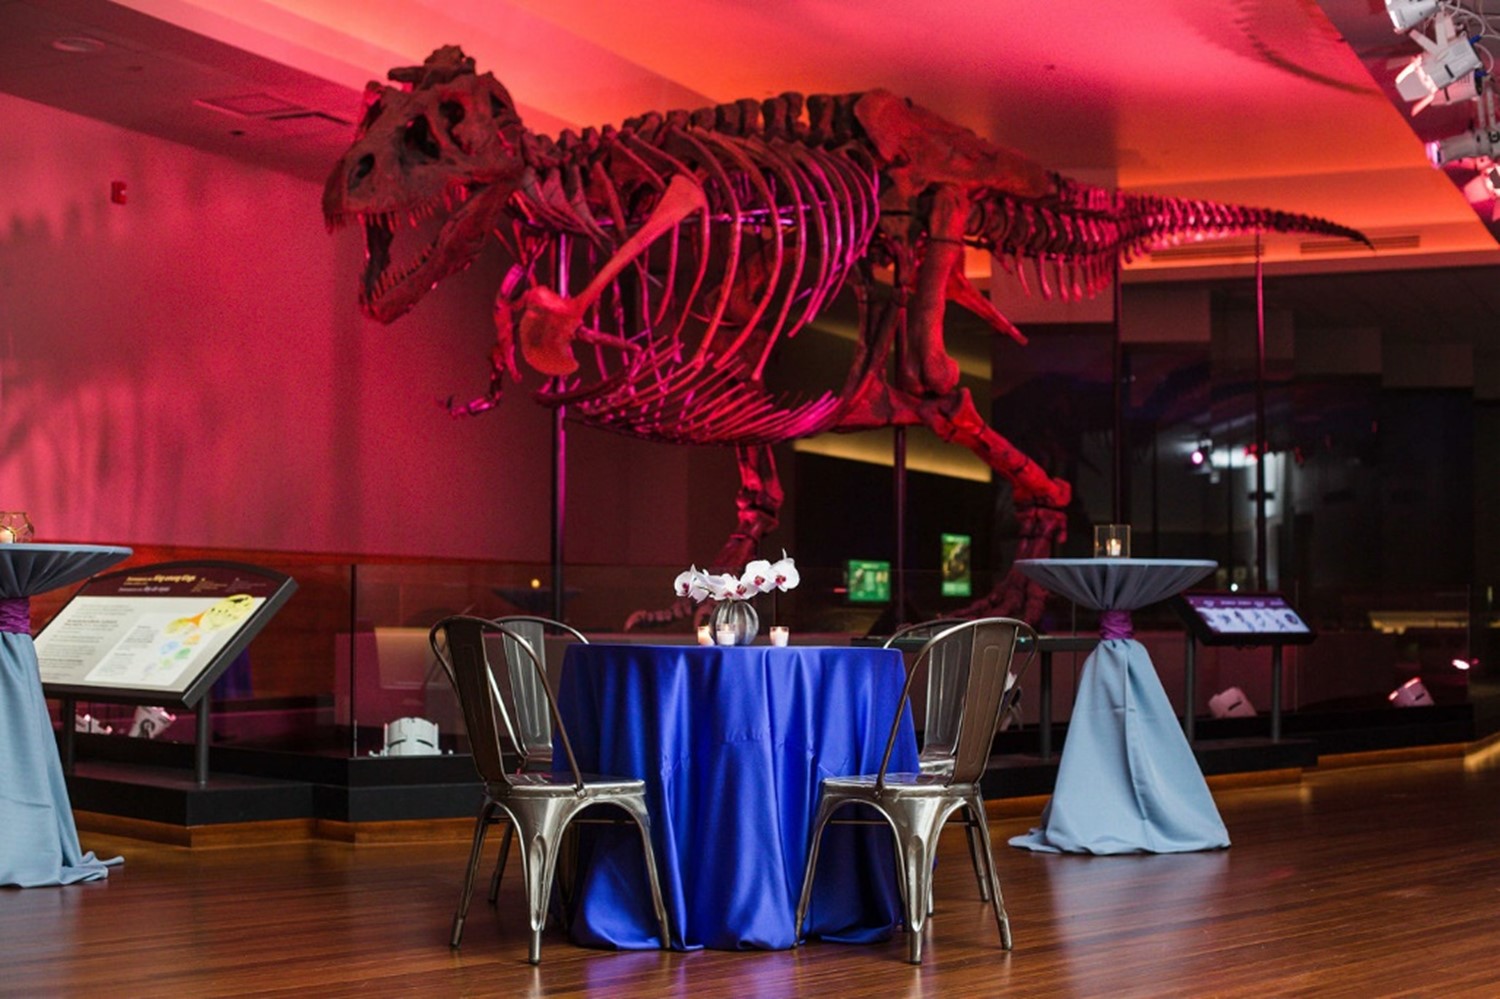 SUE the T-Rex at Chicago’s Field Museum with a round table set up in front of her.